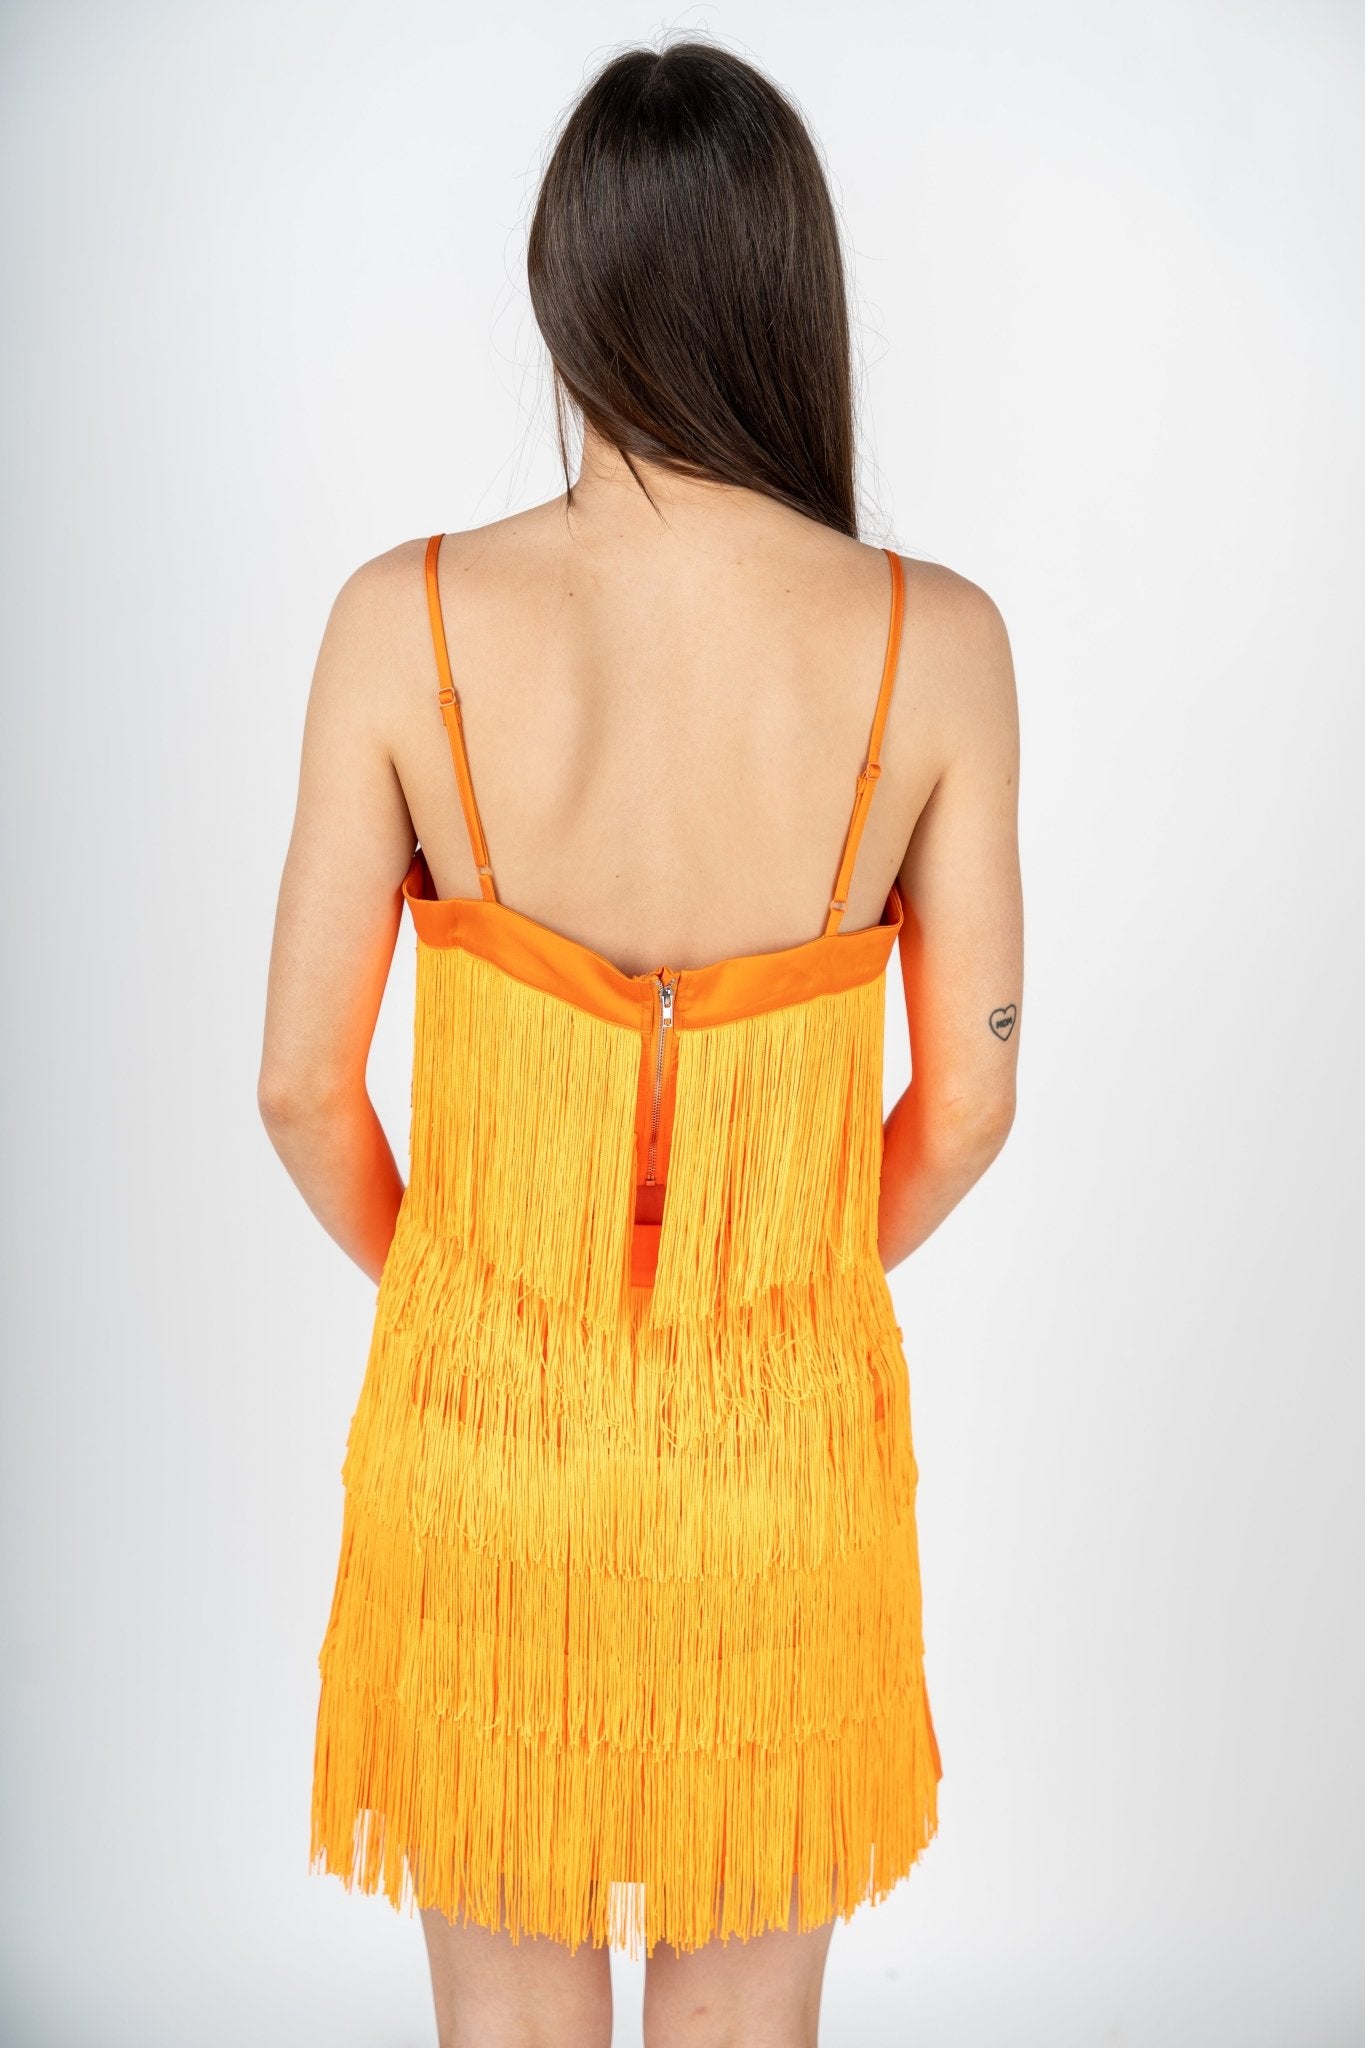 Fringe satin tank top orange - Affordable Tank Top - Boutique Tank Tops at Lush Fashion Lounge Boutique in Oklahoma City